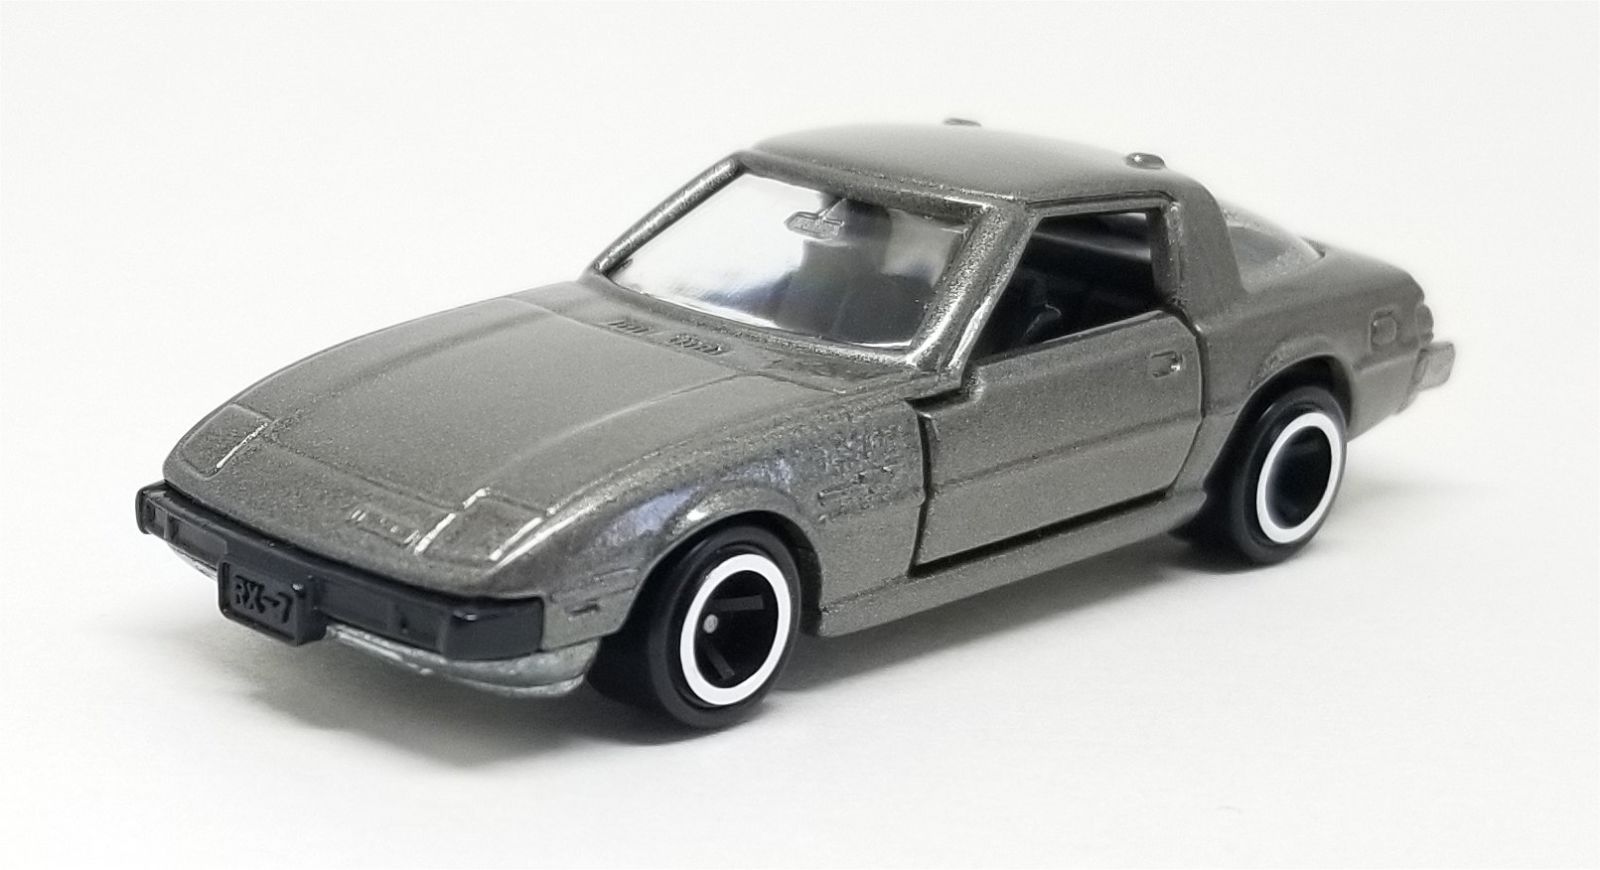 Illustration for article titled [REVIEW] Tomica Mazda Savanna RX-7